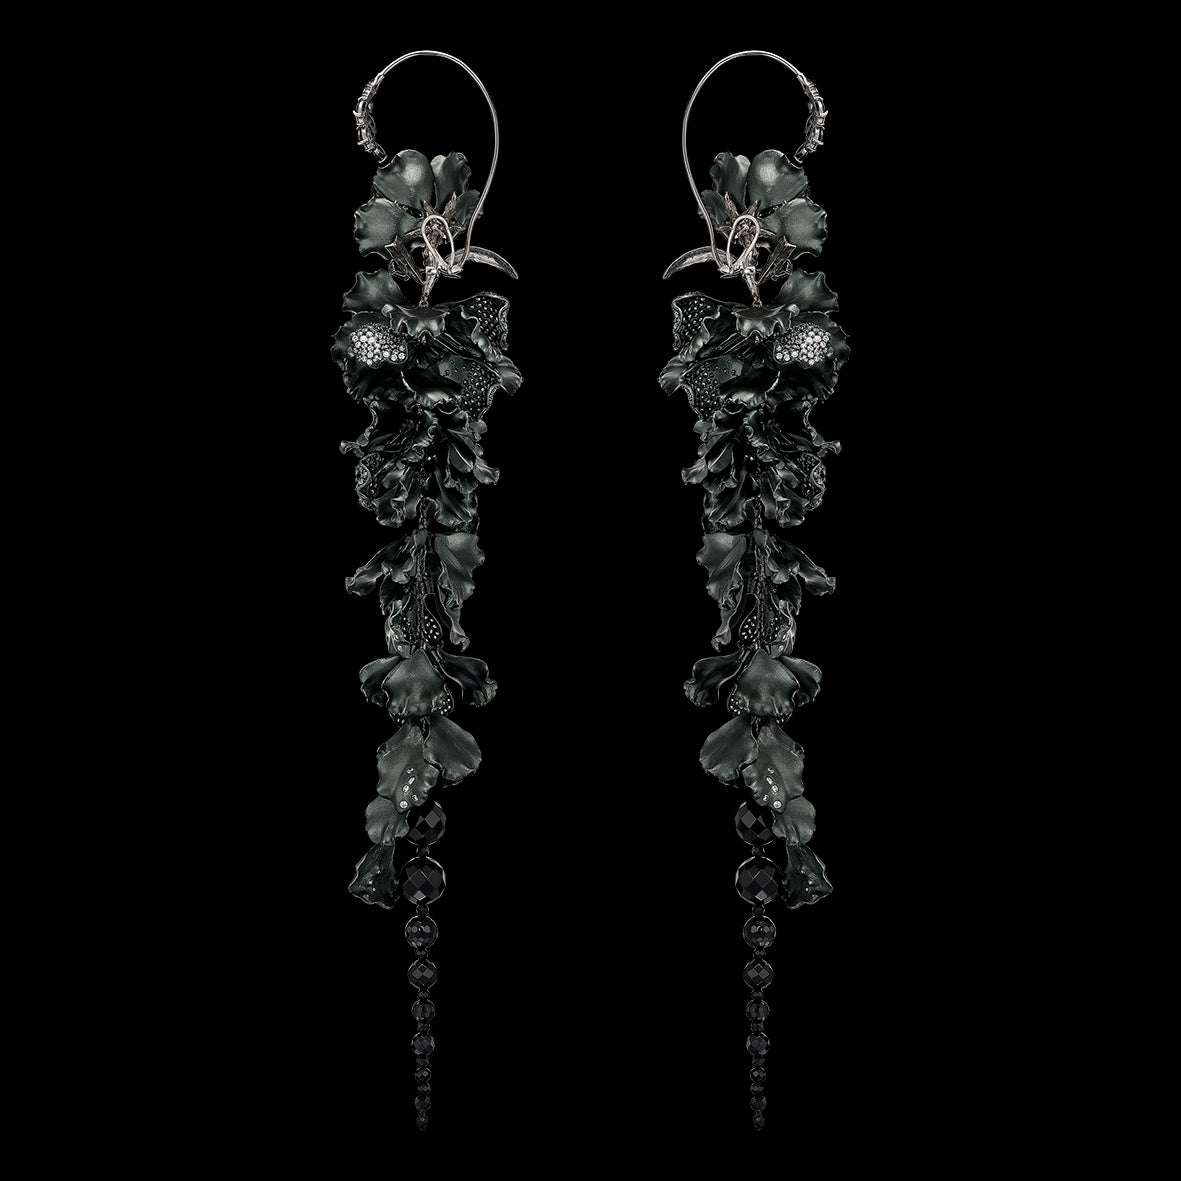 Black Diamond Wisteria Earrings, Earrings, Anabela Chan Joaillerie - Fine jewelry with laboratory grown and created gemstones hand-crafted in the United Kingdom. Anabela Chan Joaillerie is the first fine jewellery brand in the world to champion laboratory-grown and created gemstones with high jewellery design, artisanal craftsmanship and a focus on ethical and sustainable innovations.